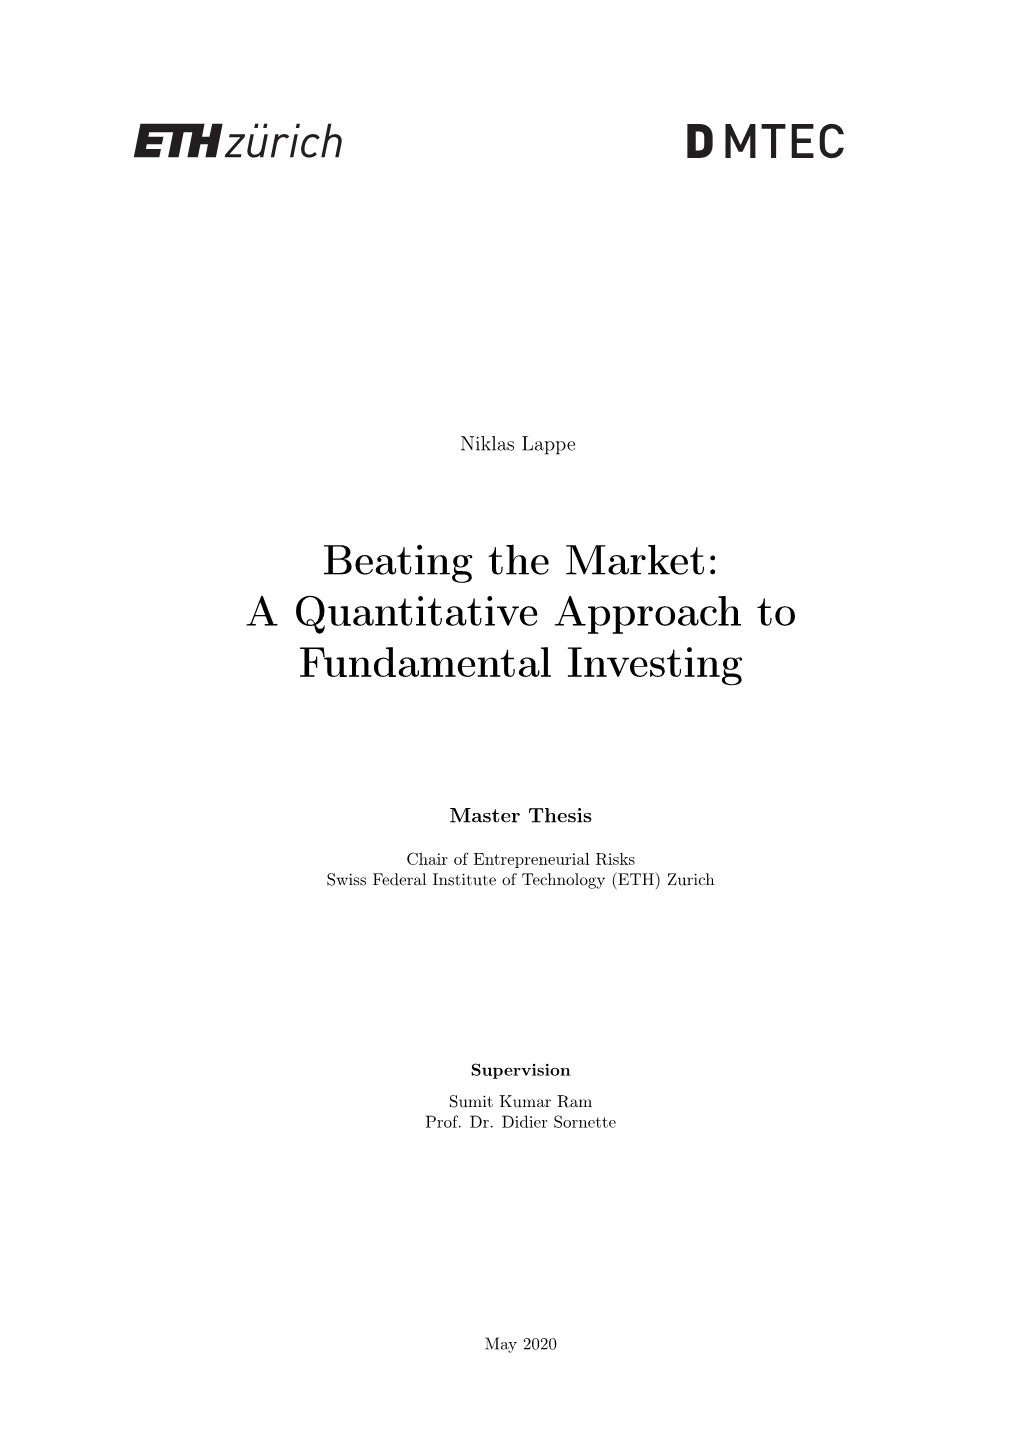 Beating the Market: a Quantitative Approach to Fundamental Investing